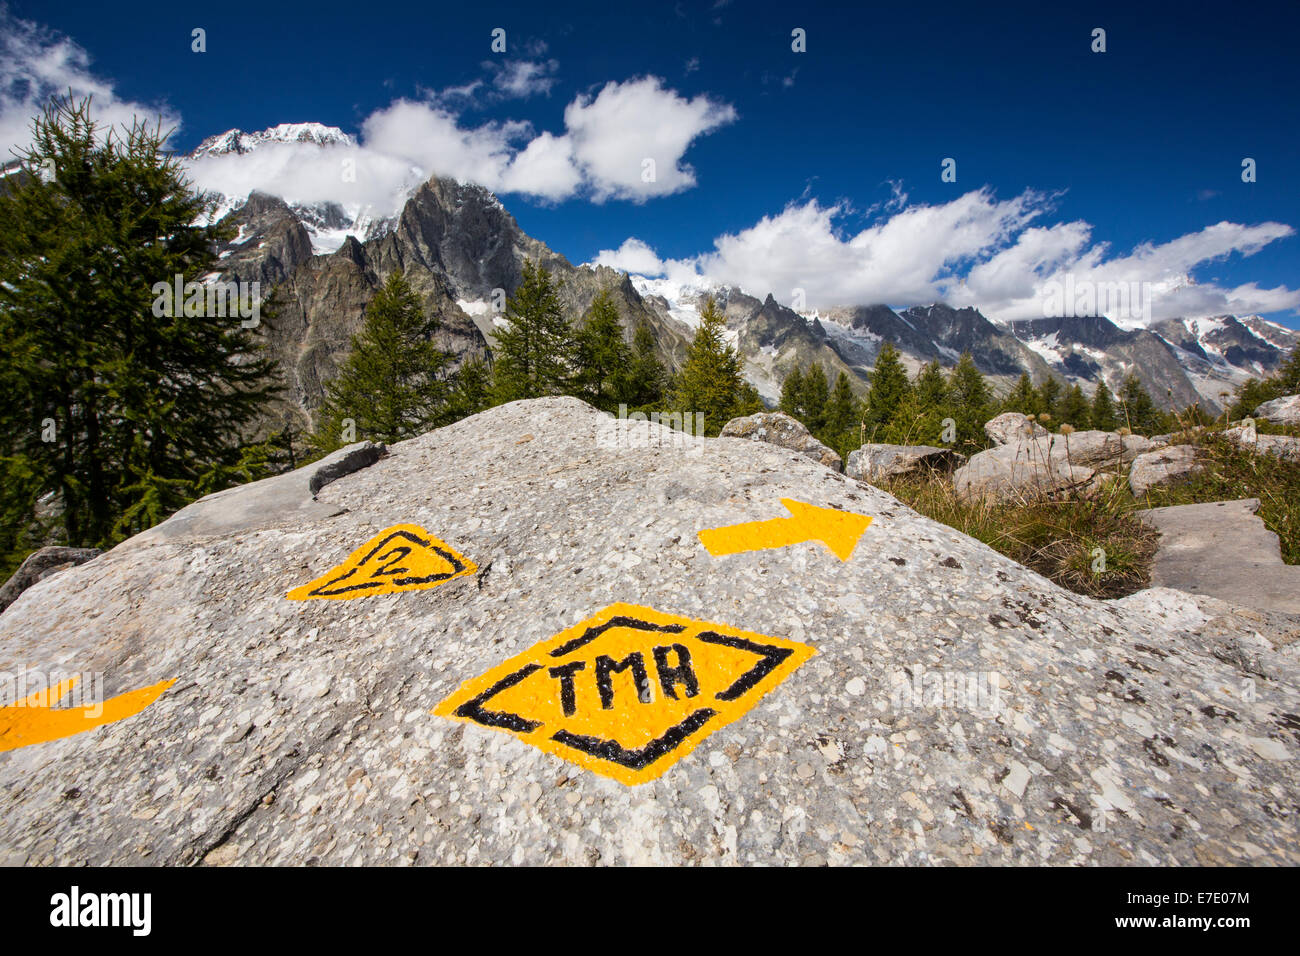 Looking towards Mont Blanc from above Val Veny, Italy, with a rock marked with the Tour du Mont Blanc long distance footpath. Stock Photo